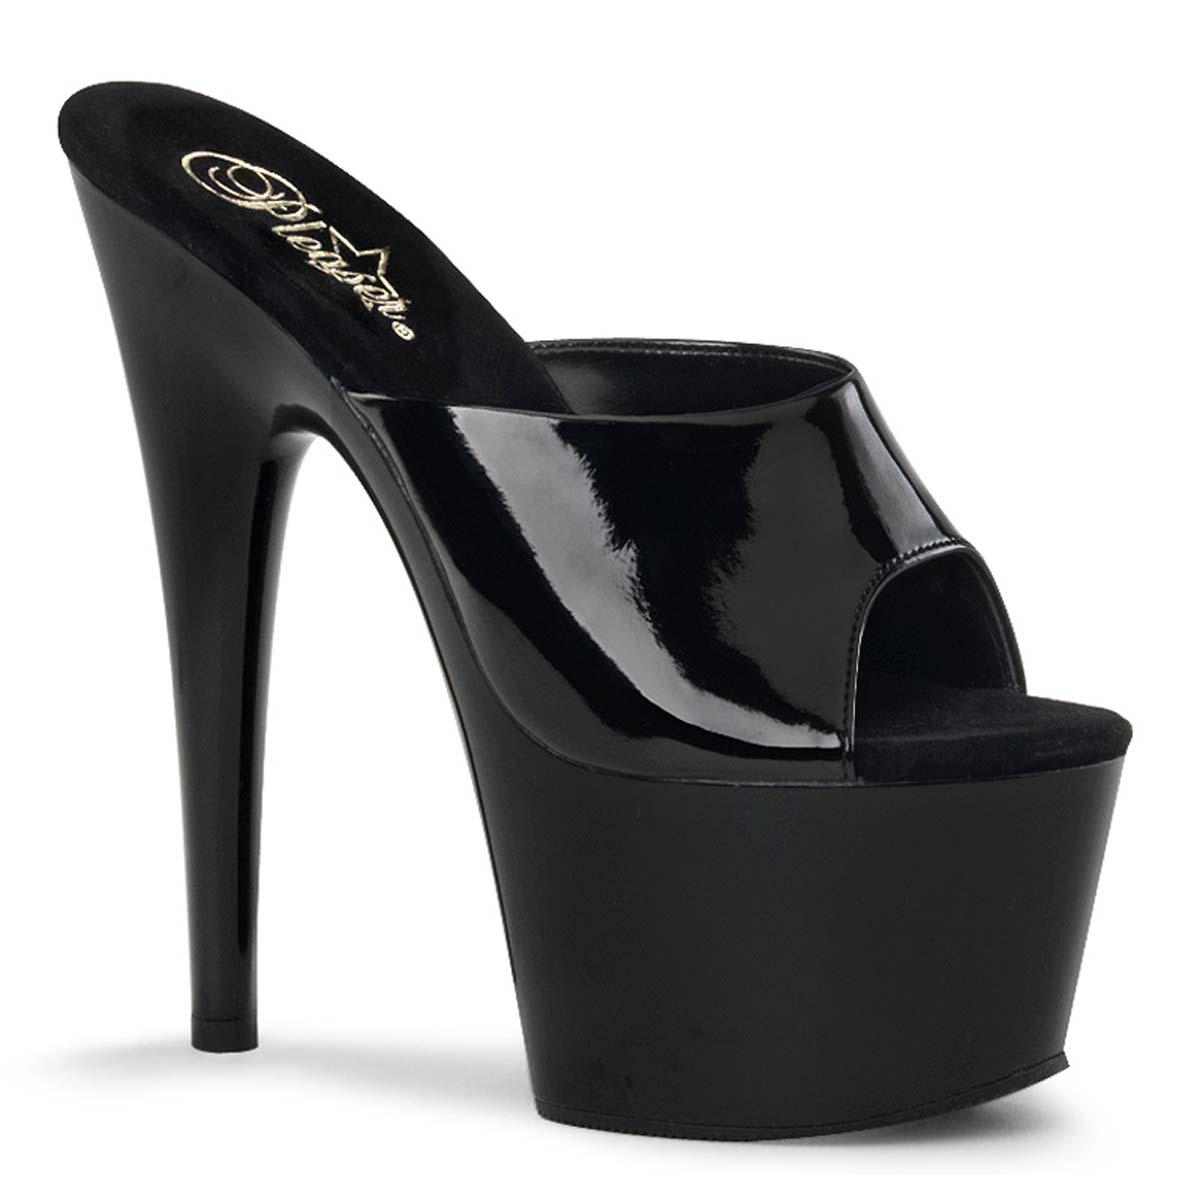 Pleaser Adore 701 Black Patentblack In Sexy Heels And Platforms 4995